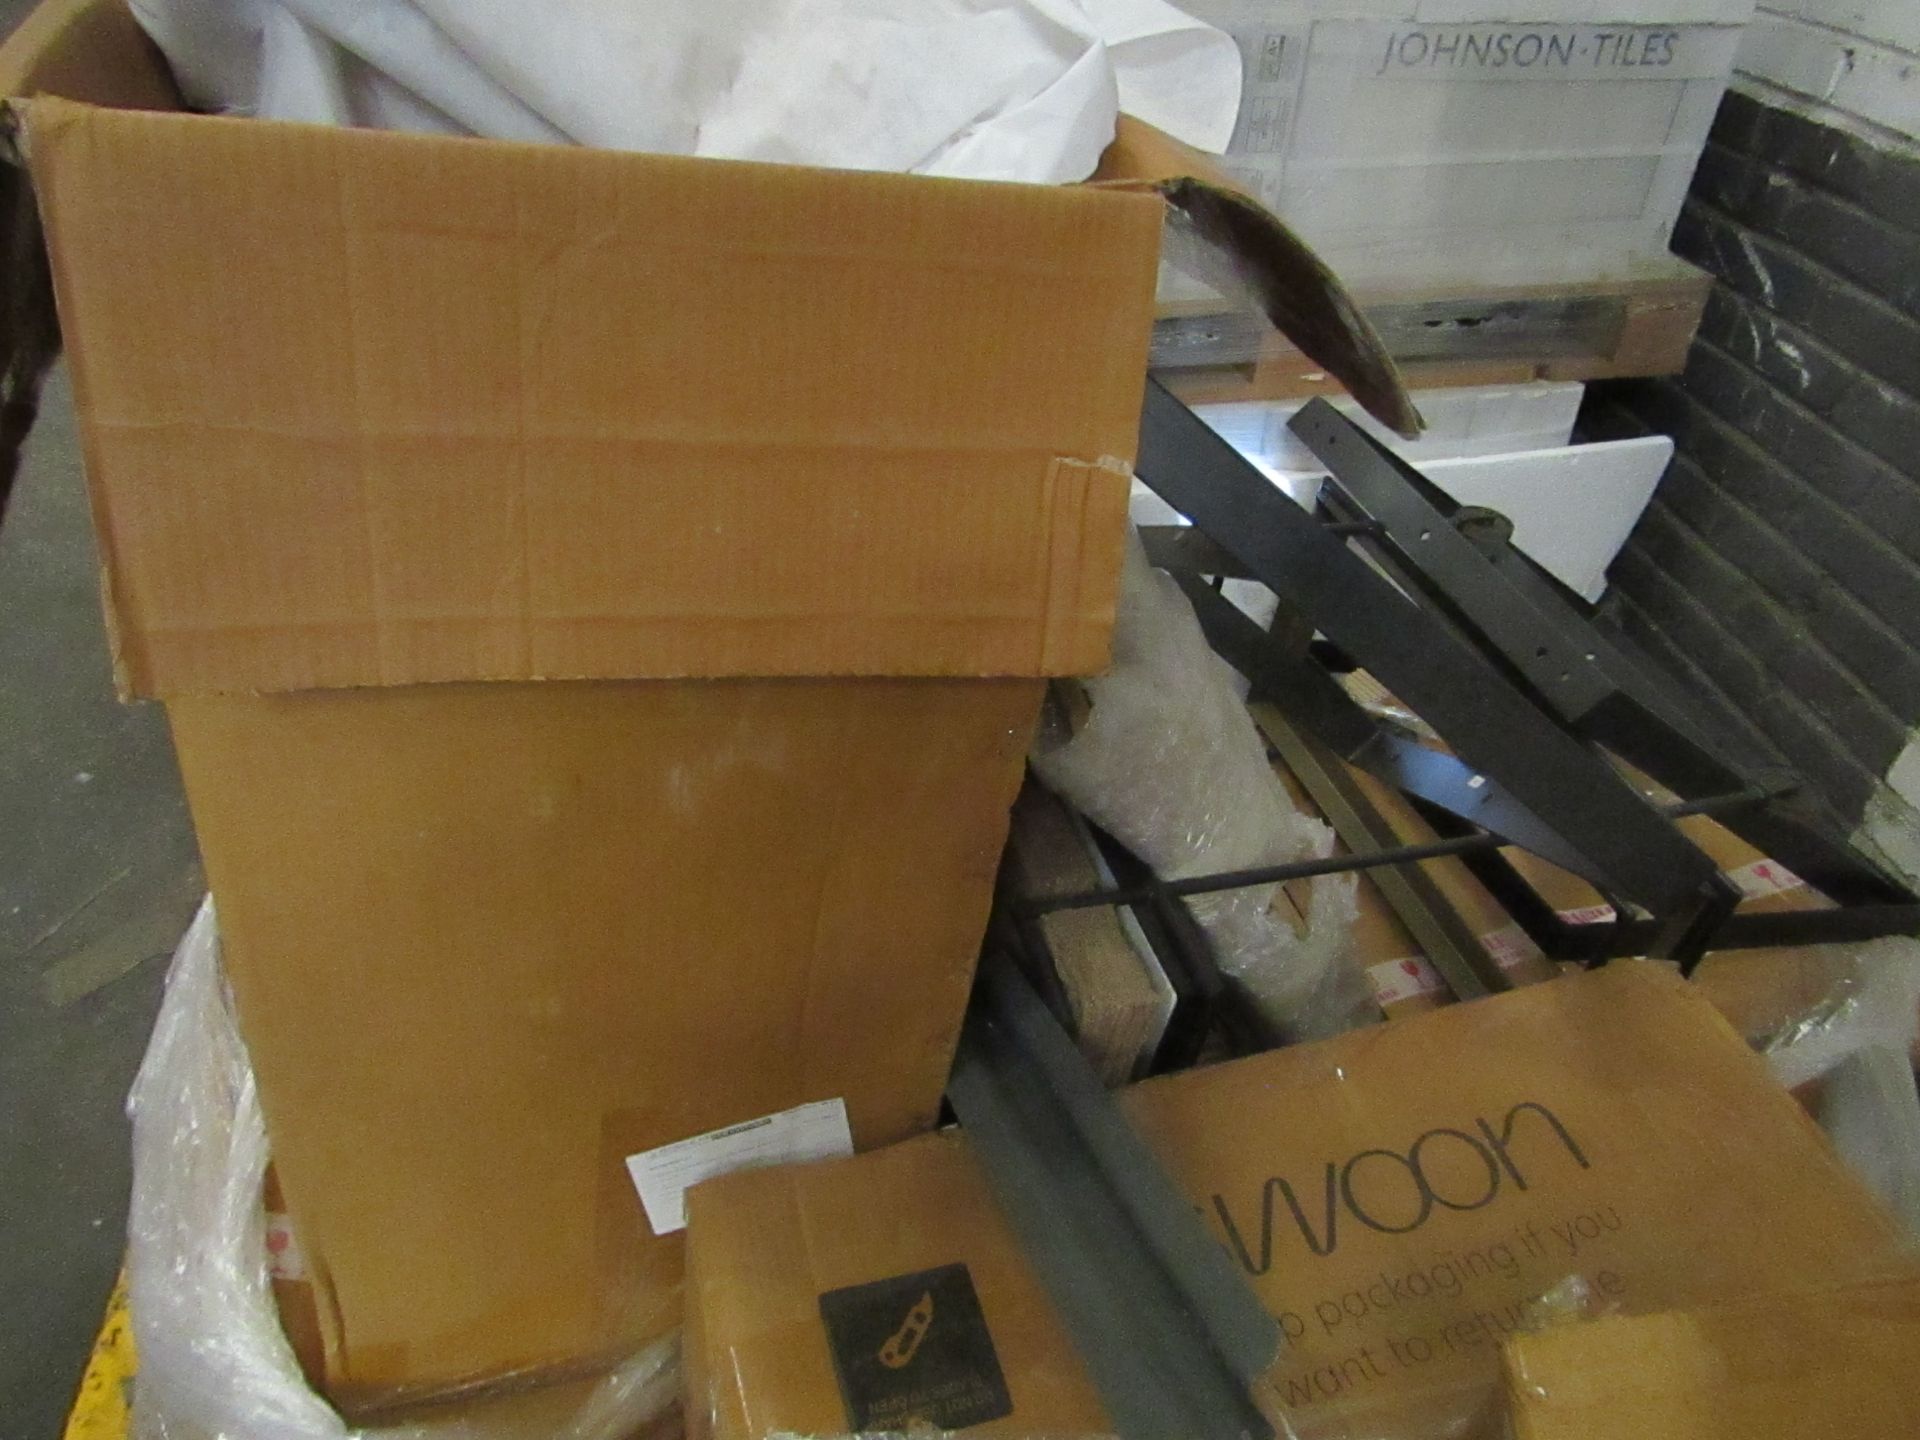 | 1X | PALLET OF SWOON  B.E.R FURNITURE, UNMANIFESTED, WE HAVE NO IDEA WHAT IS ON THESE PALLETS OR